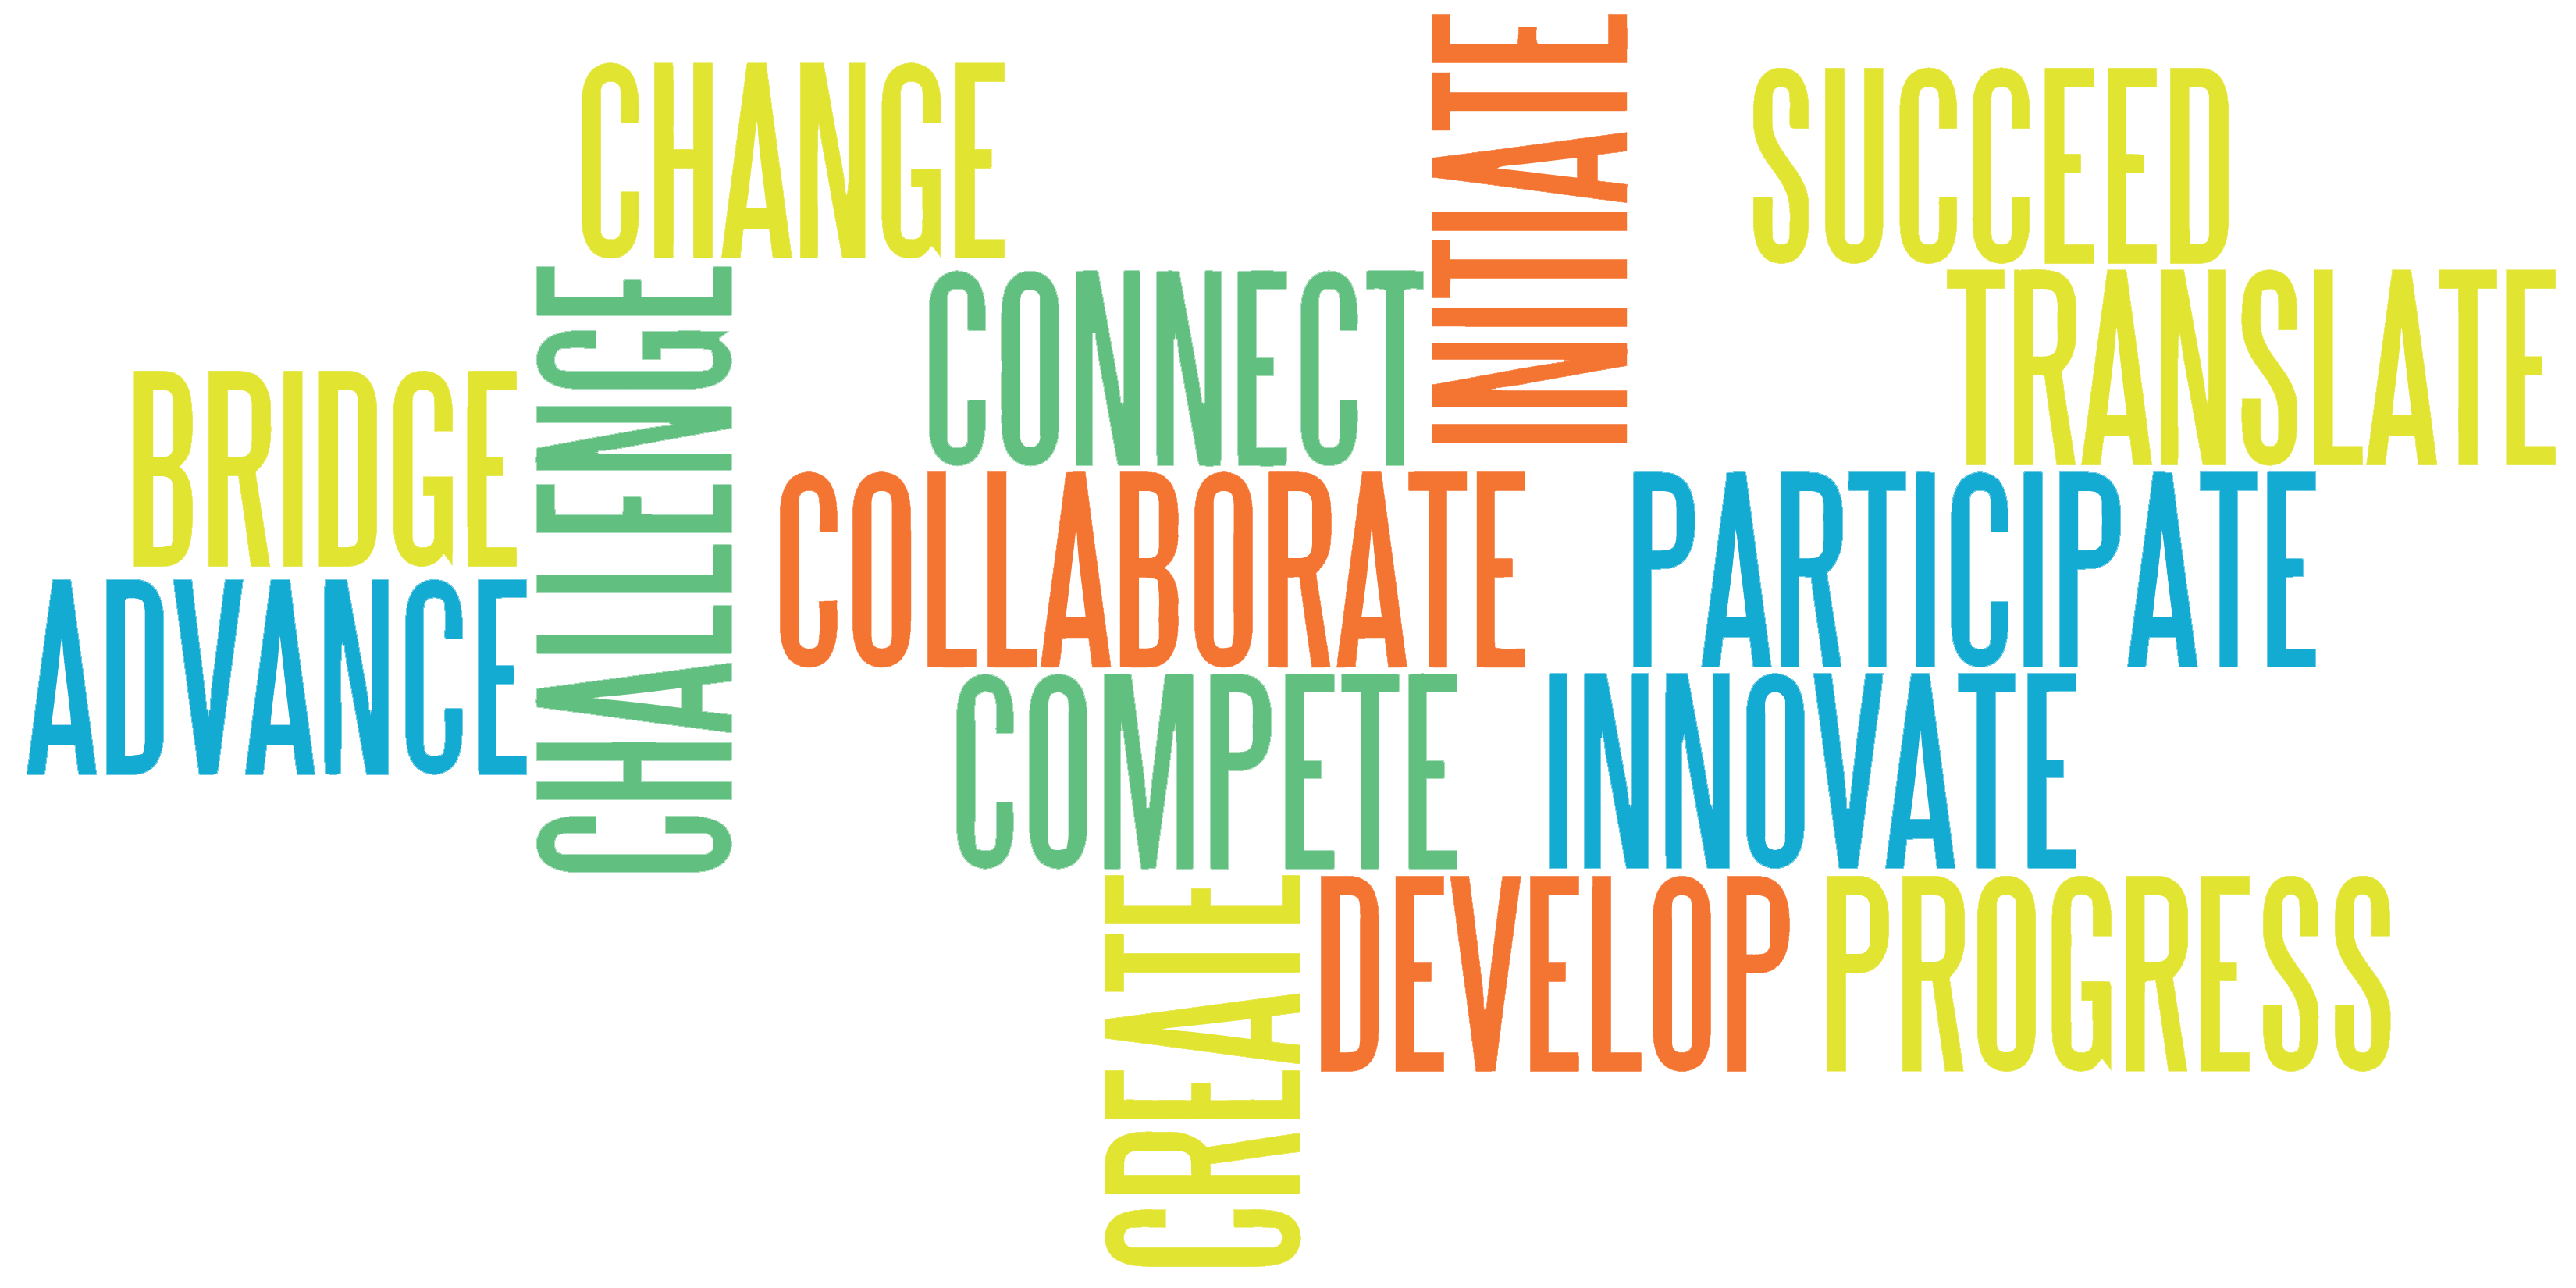 Word cloud representing core themes of the PInCh program